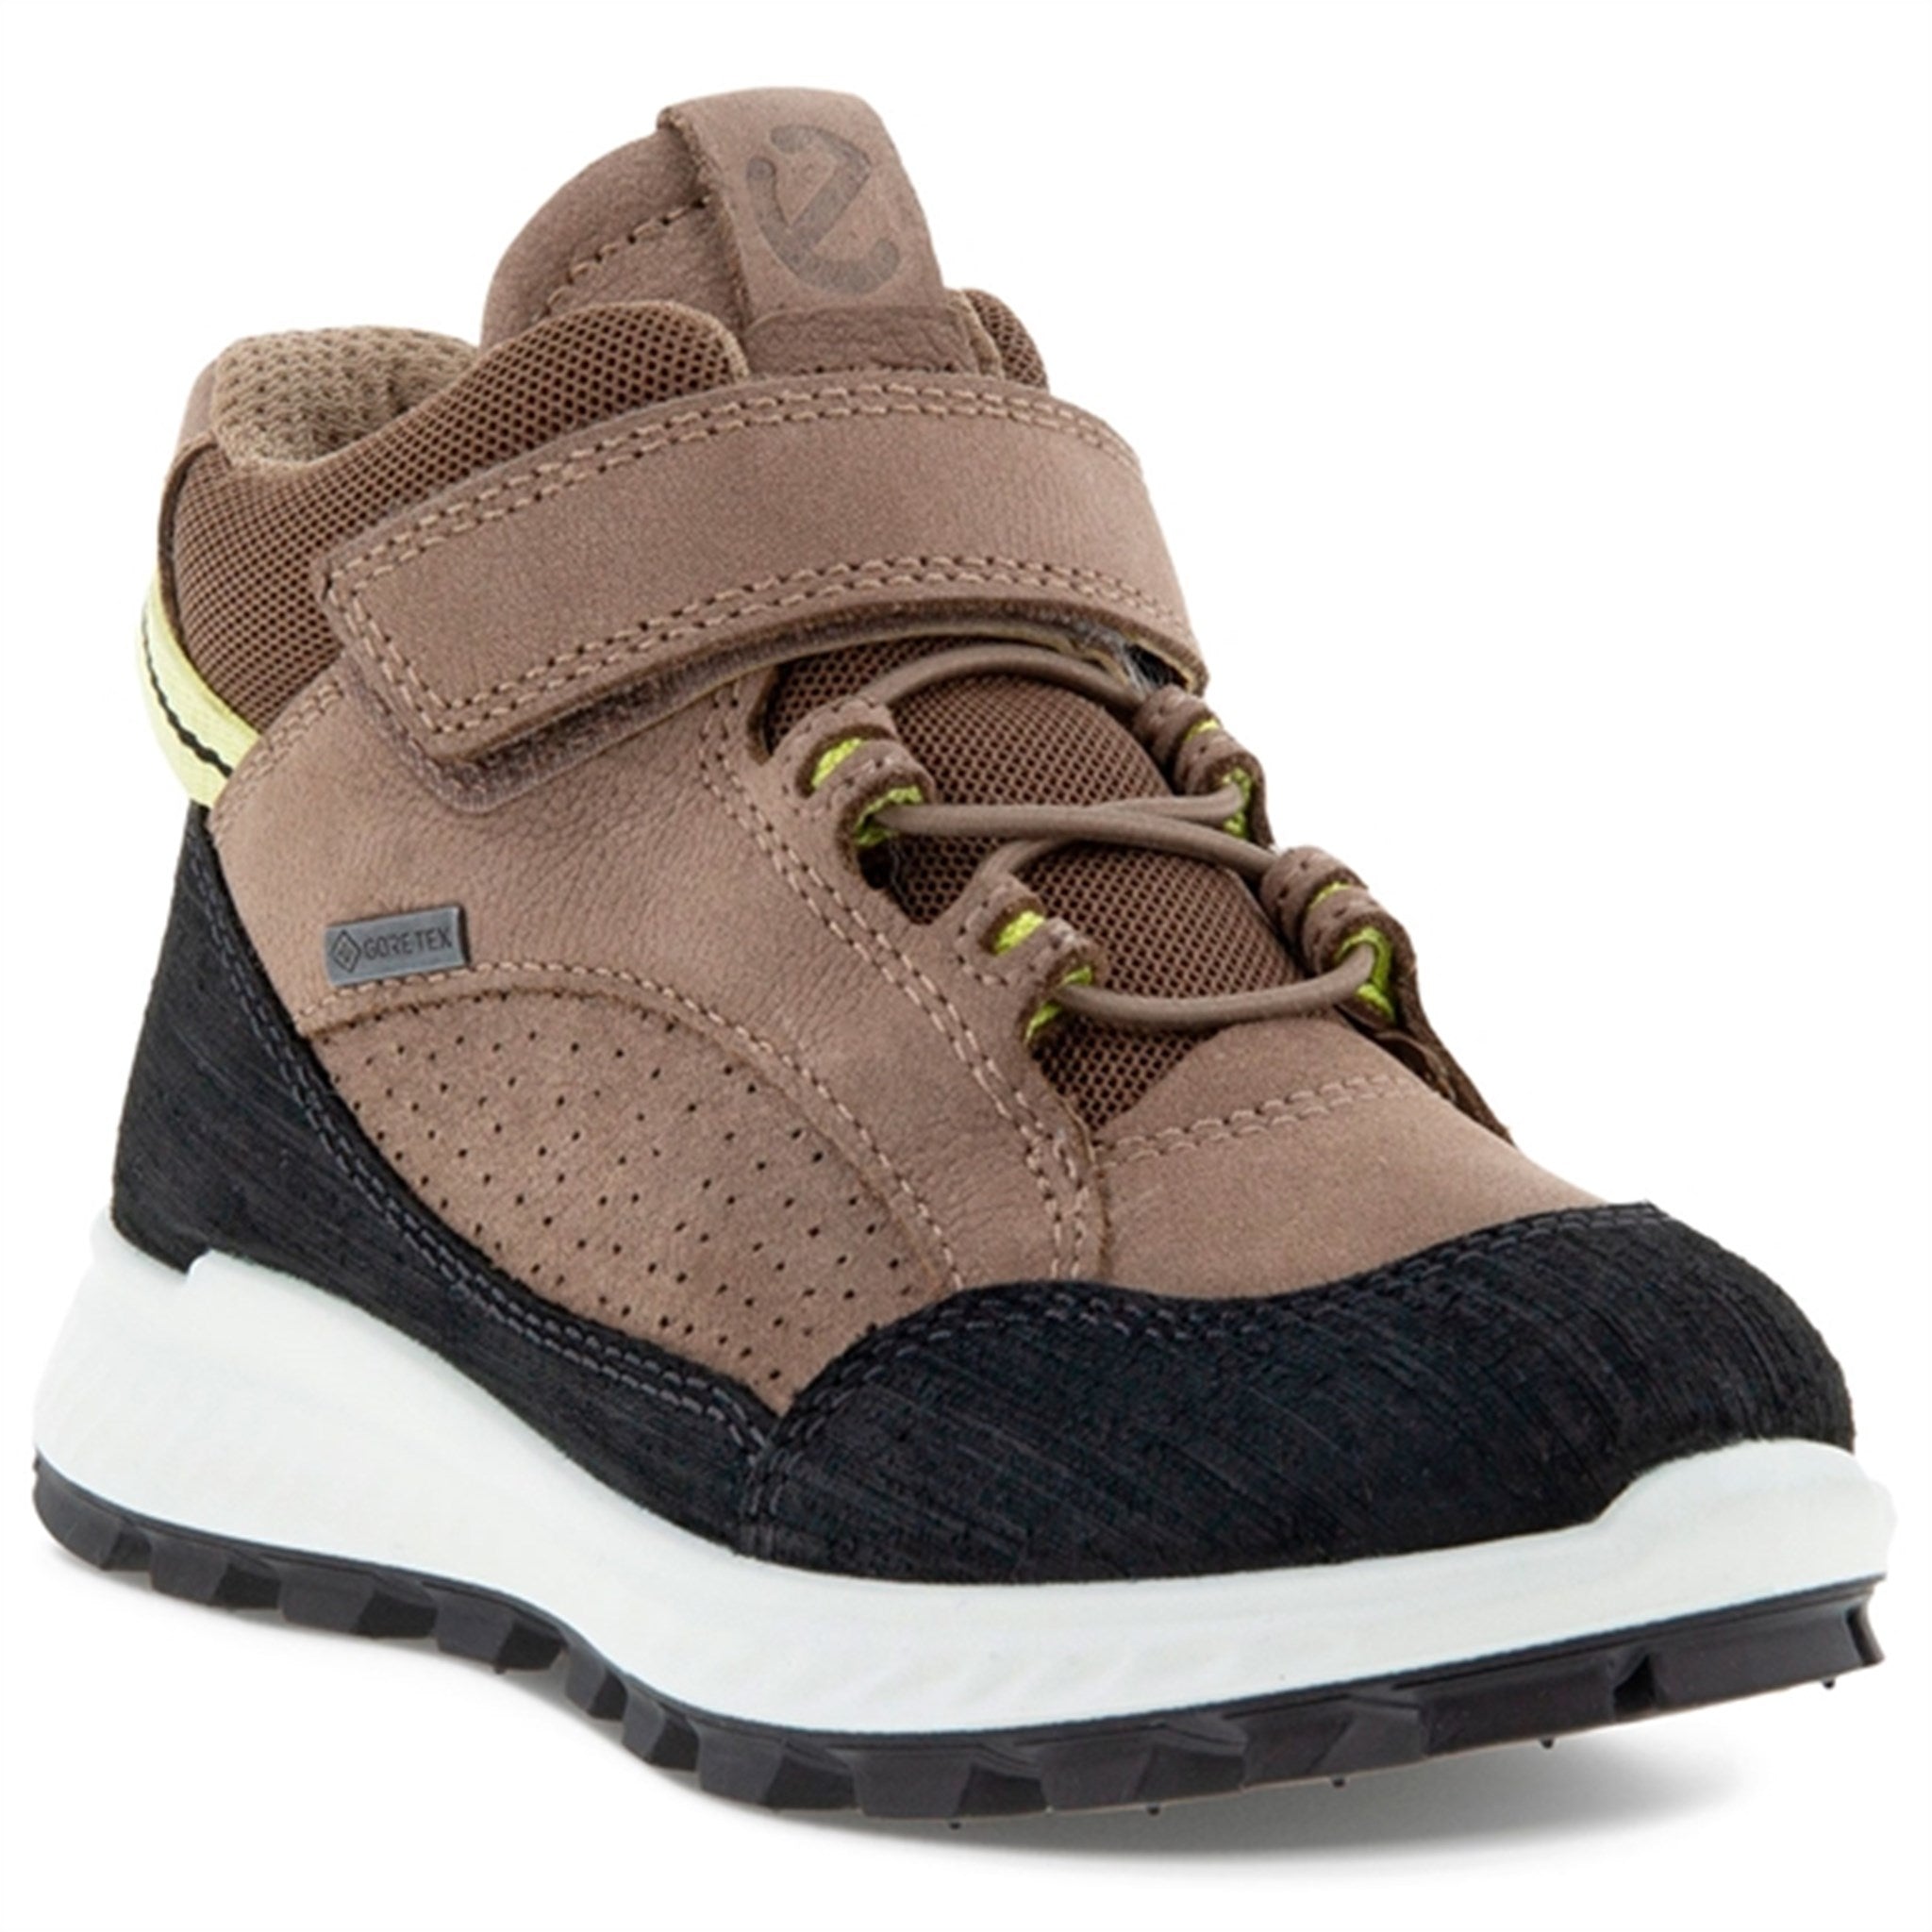 Ecco Exostrike Kids Ankle Boot Black/Taupe/Taupe